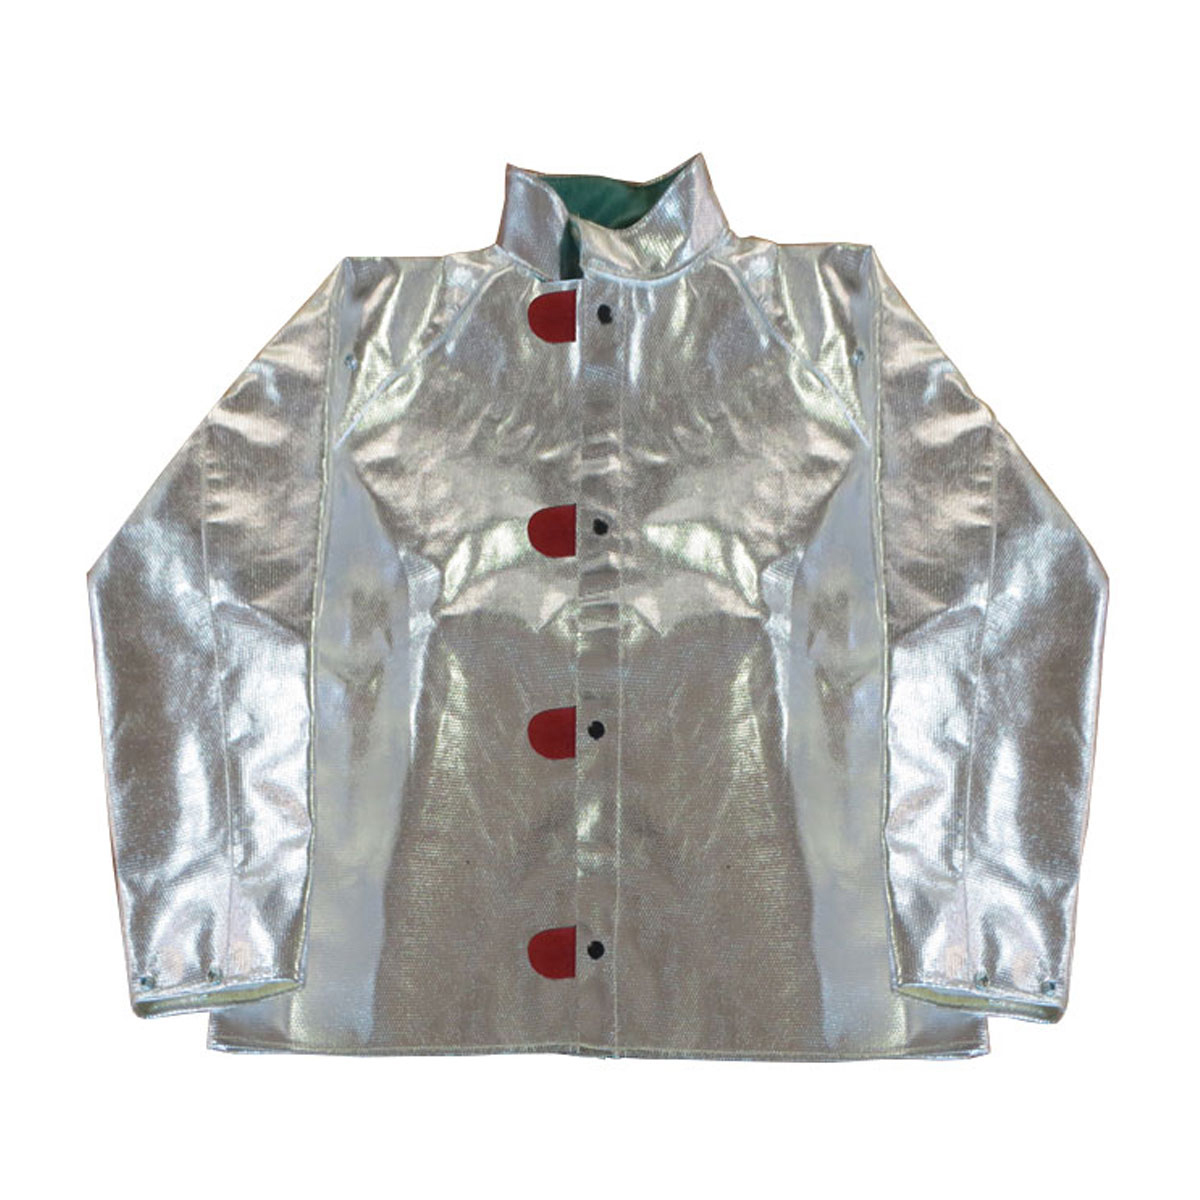 Chicago Protective Apparel X-Large Silver Aluminized Rayon Heat Resistant Jacket